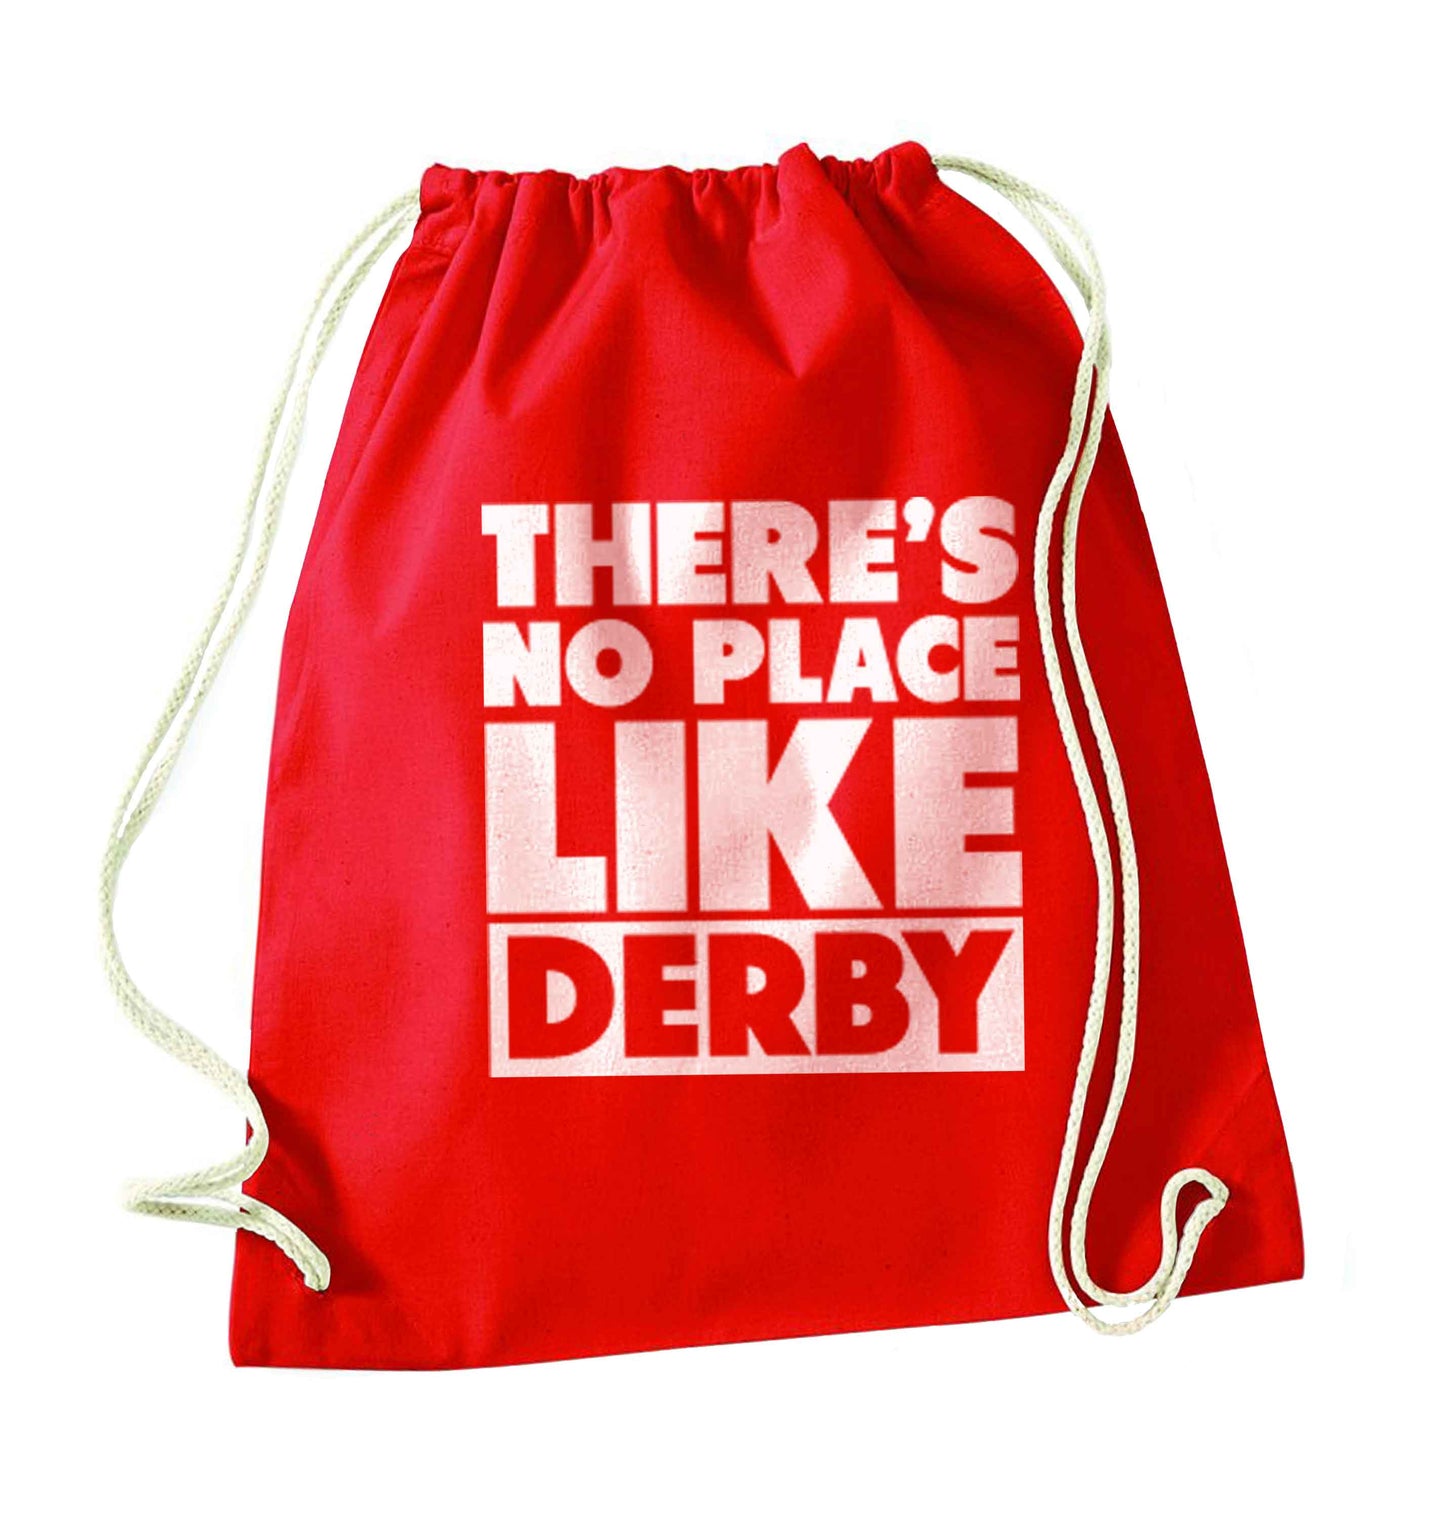 There's no place like Derby red drawstring bag 